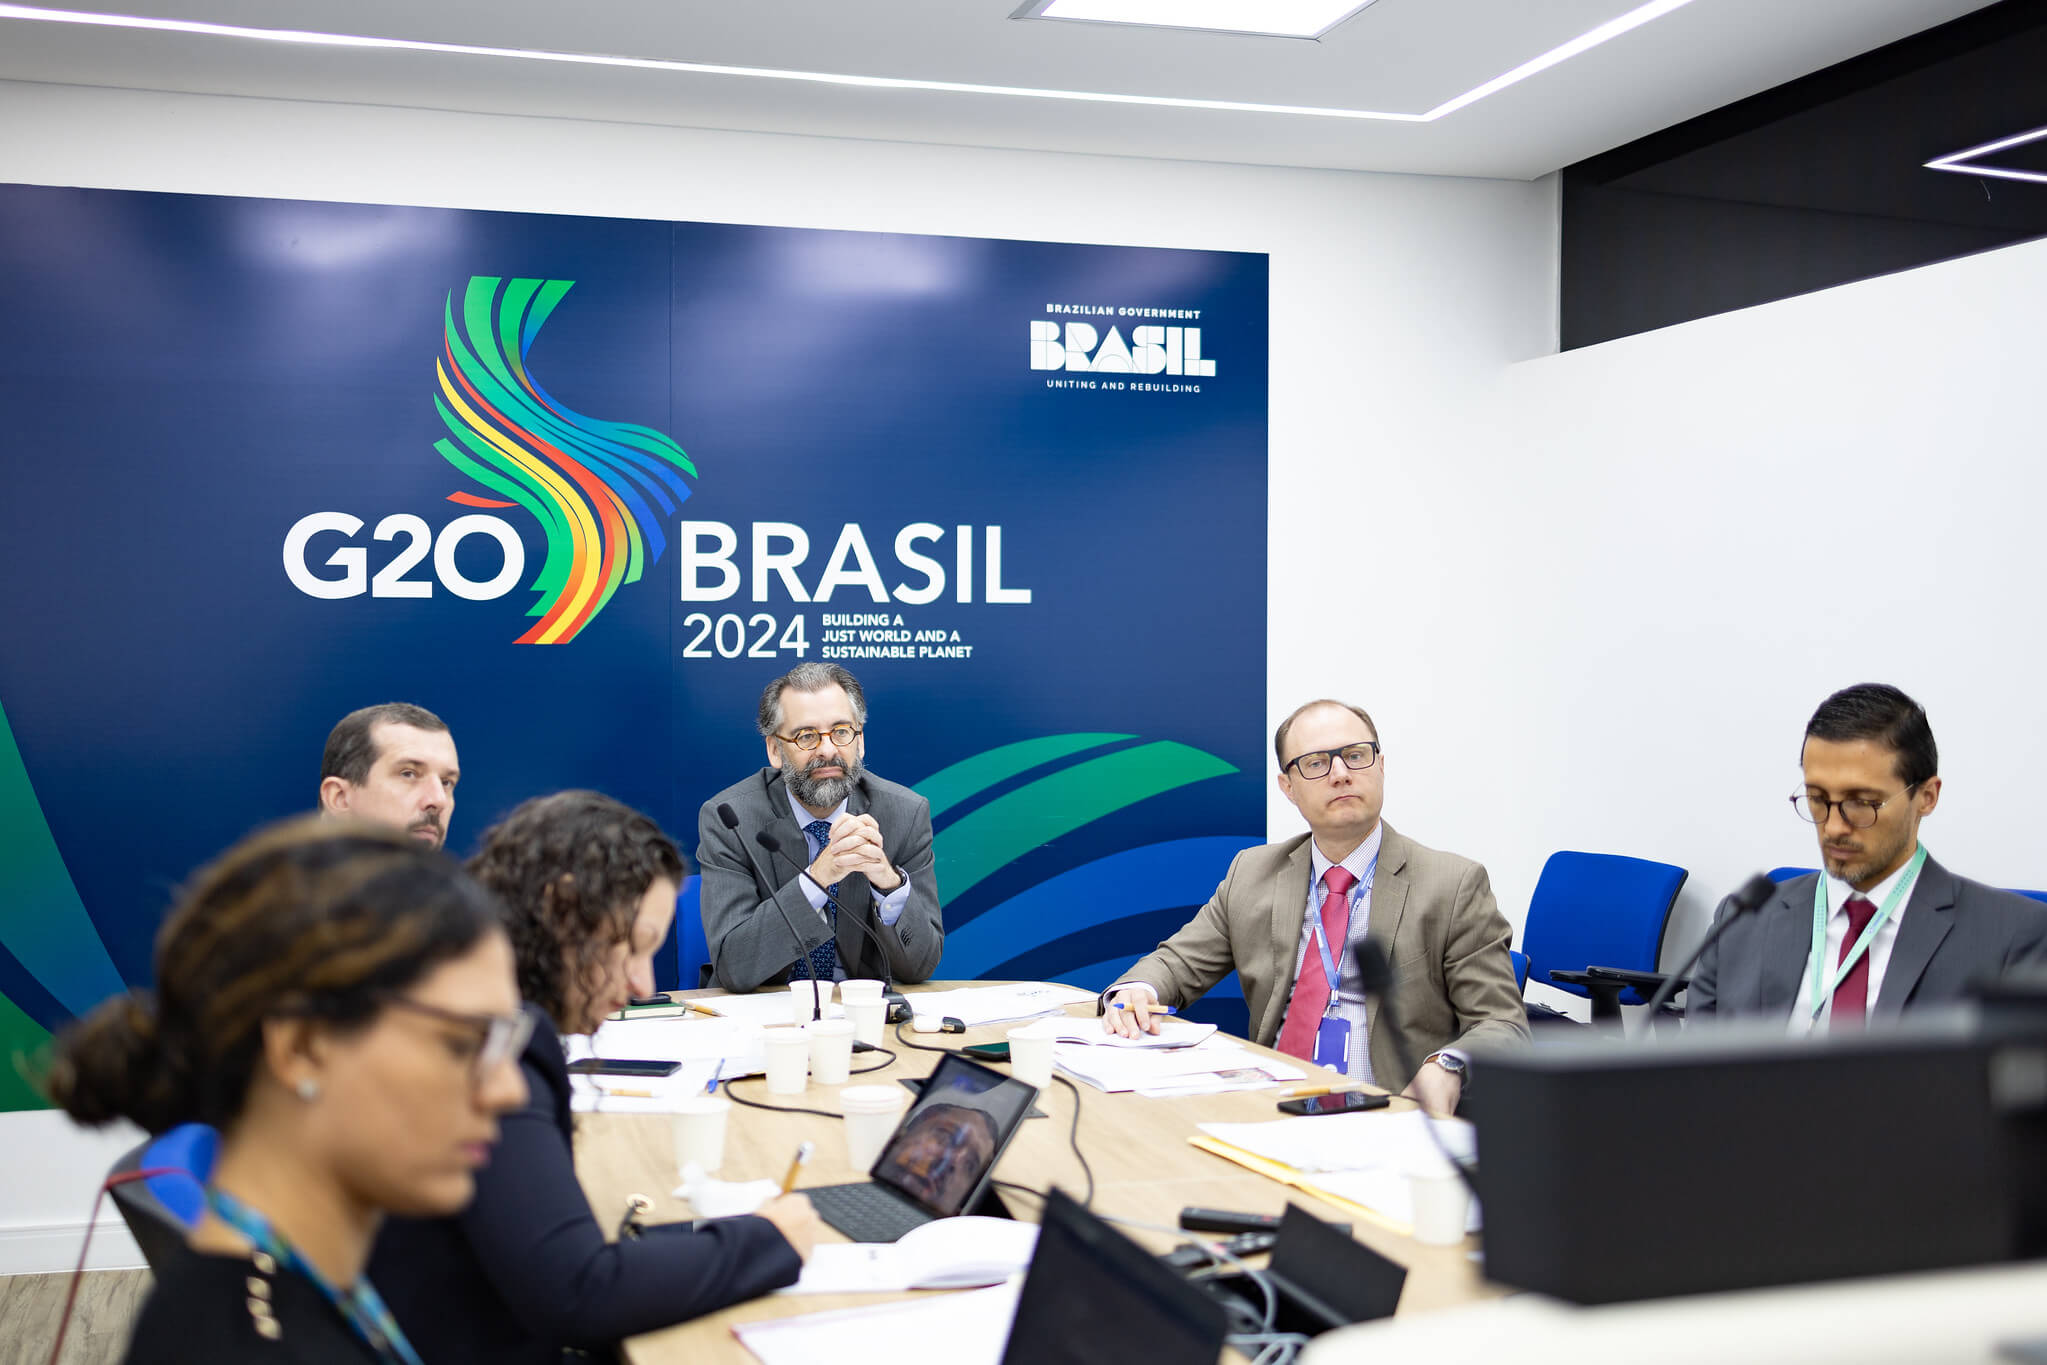 A team from Brasil’s Ministry of Foreign Affairs during the second meeting of the G20 sherpas, this week in Brasilia, via videoconference | Photo: Audiovisual G20 Brasil.